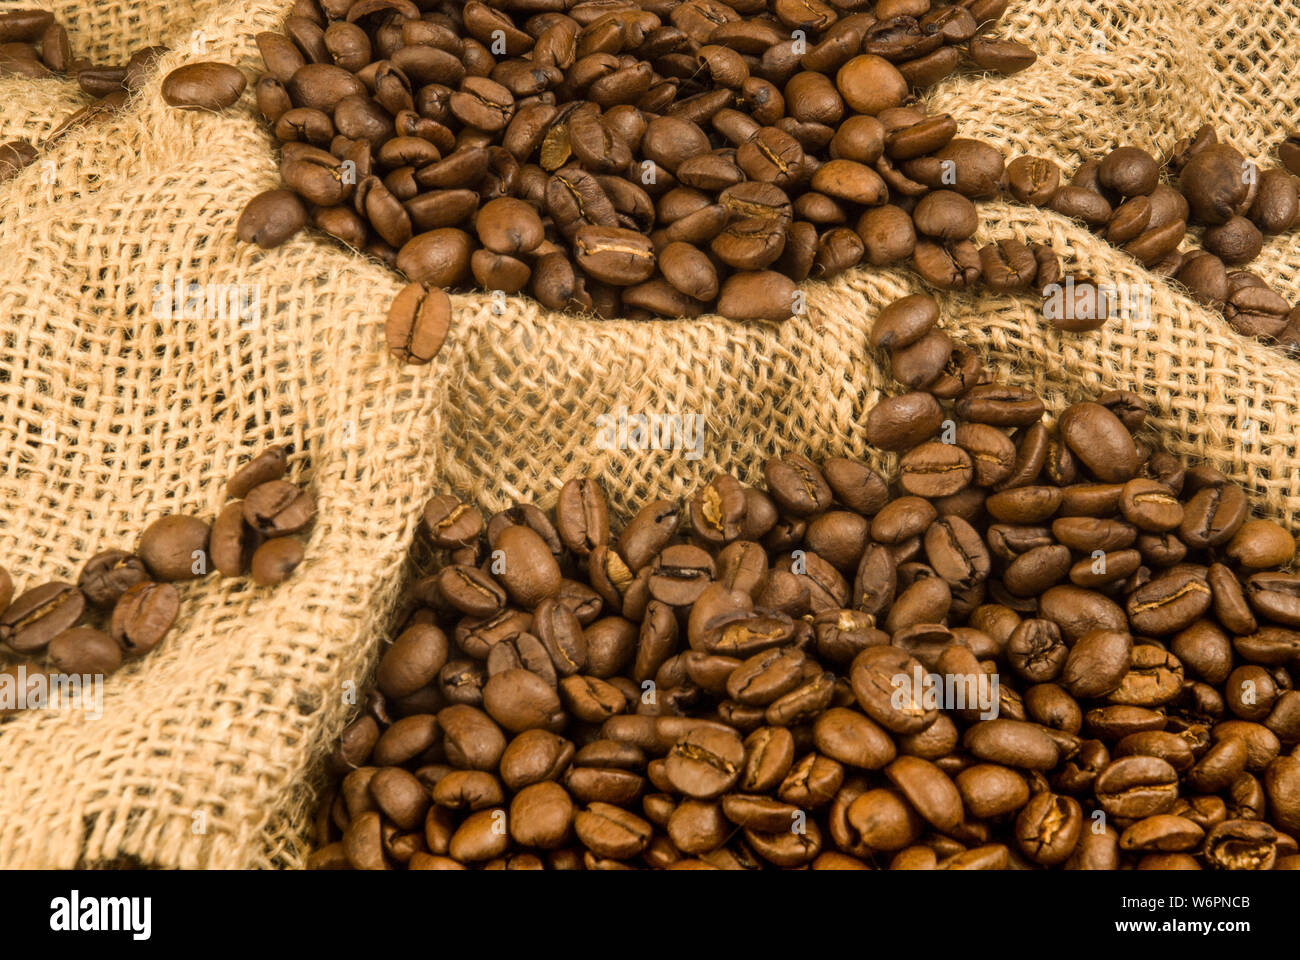 Shot of a sack of roasted coffee beans ready to be ground for a fresh coffee experience. Stock Photo